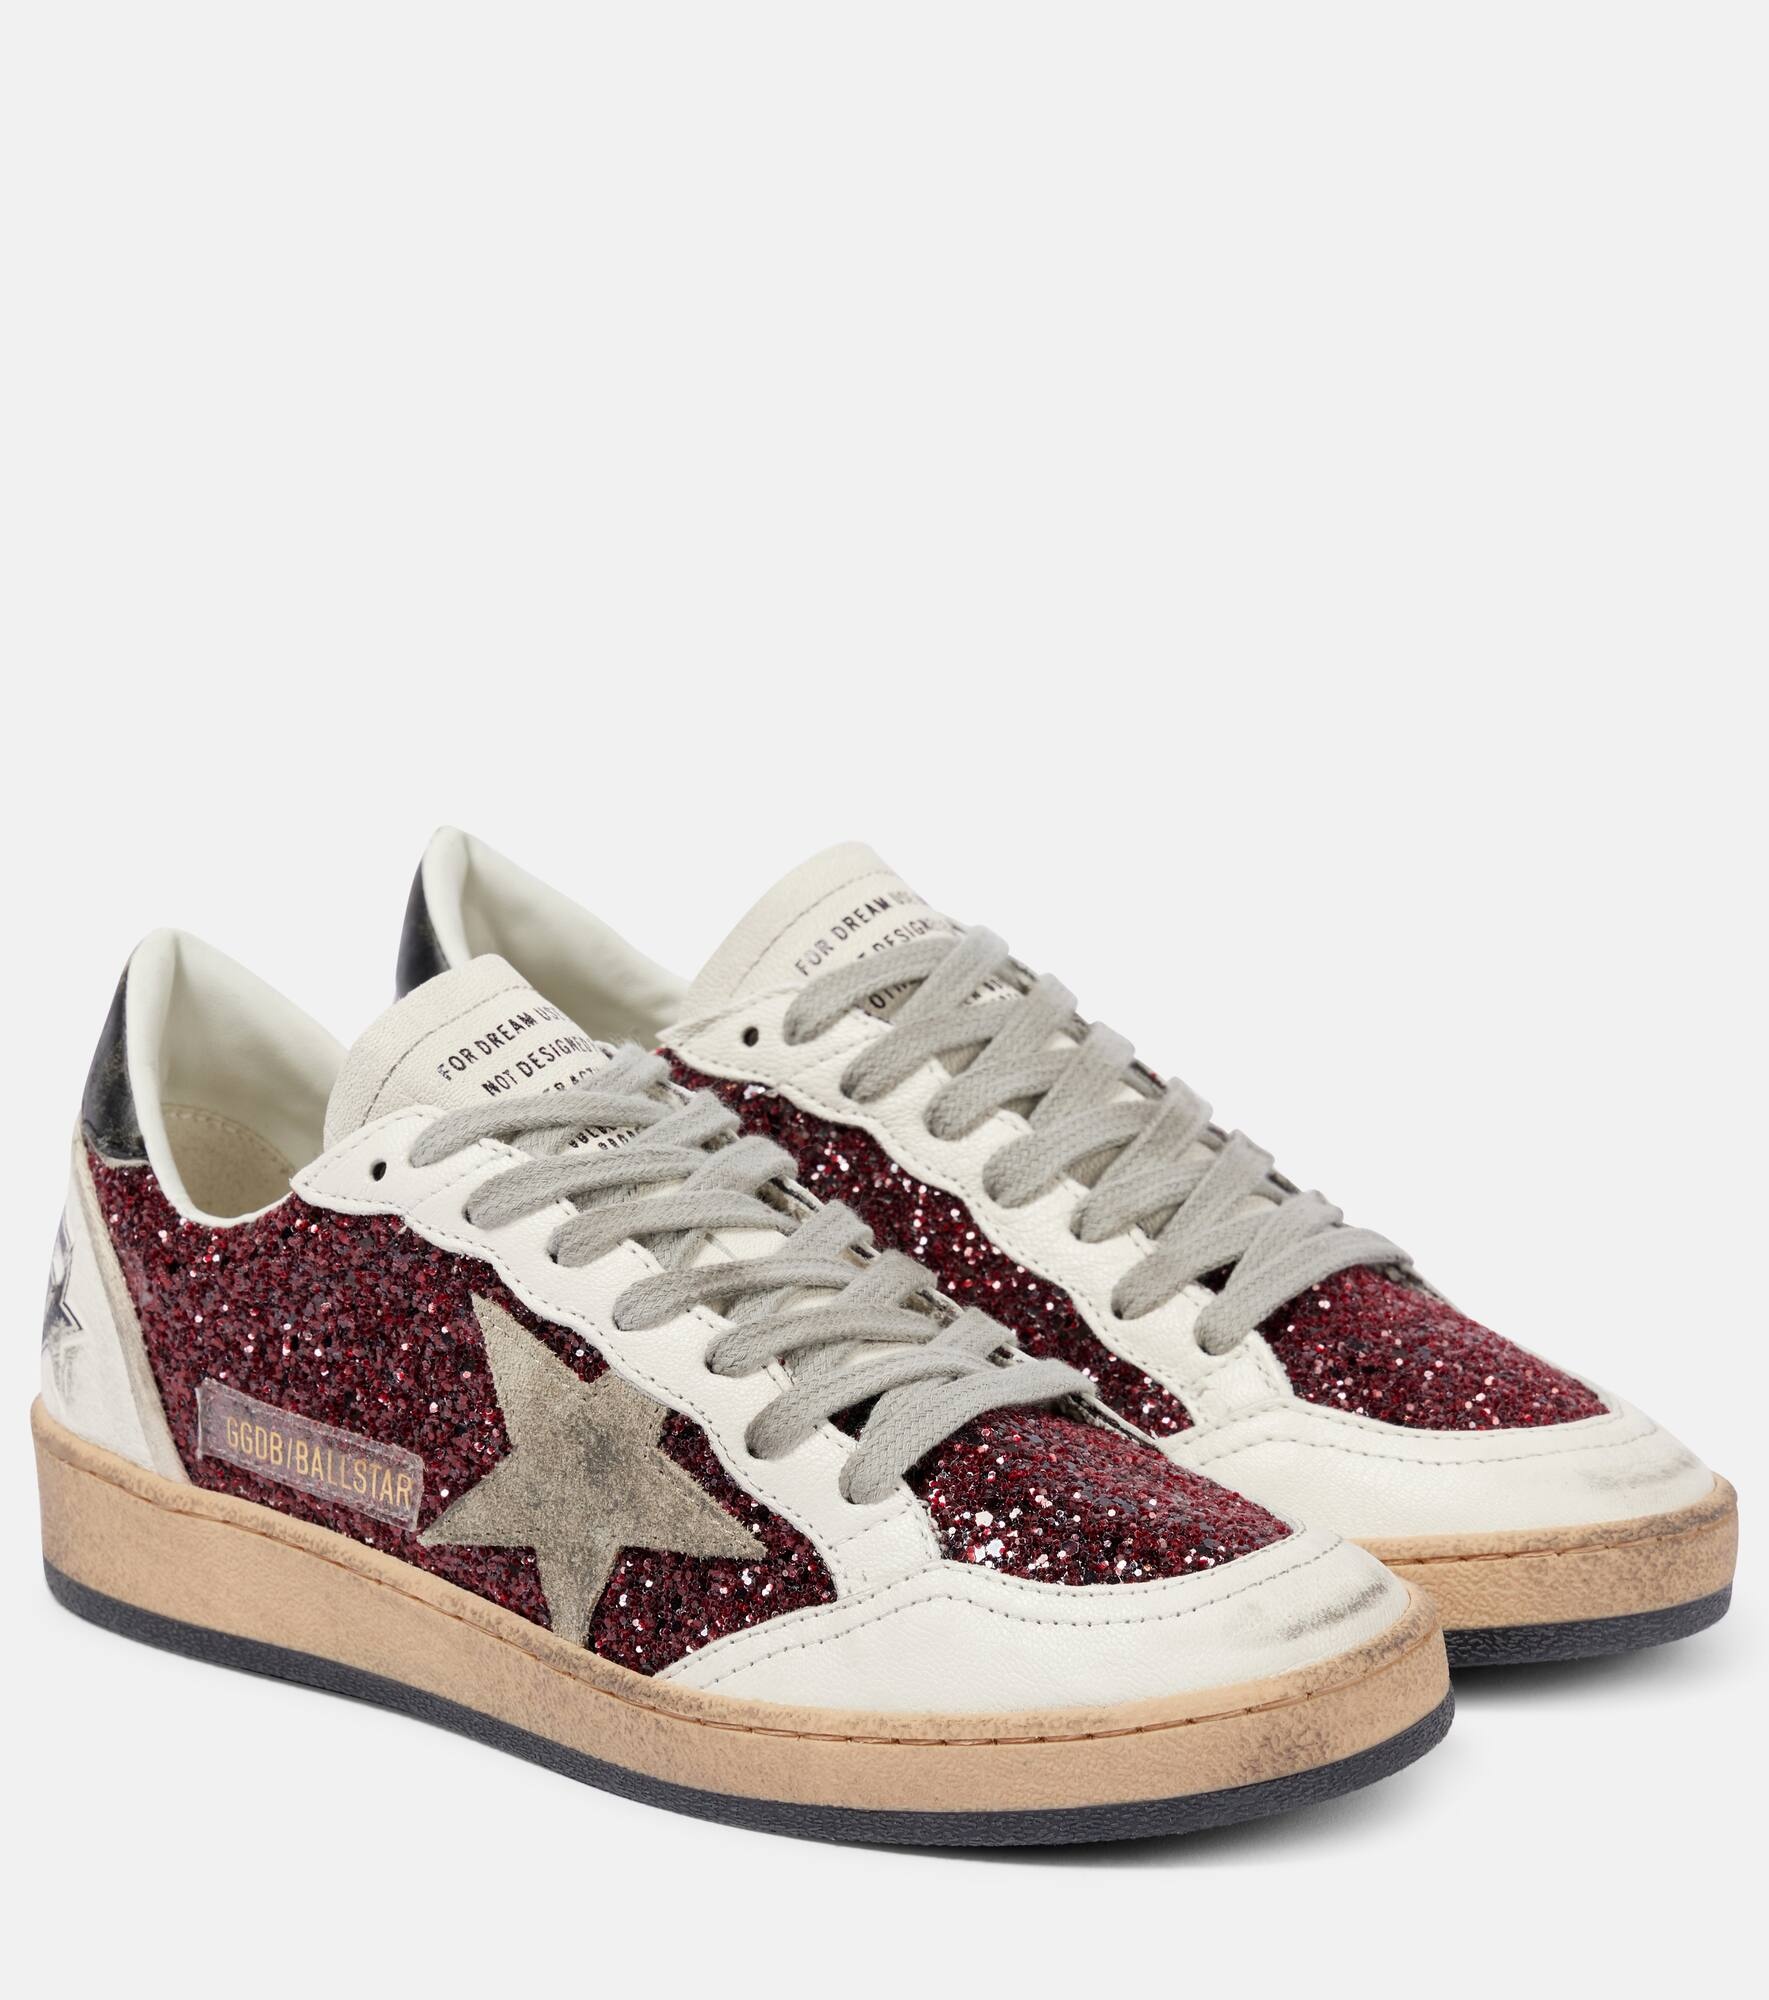 Ball-Star leather-trimmed glitter sneakers - 1